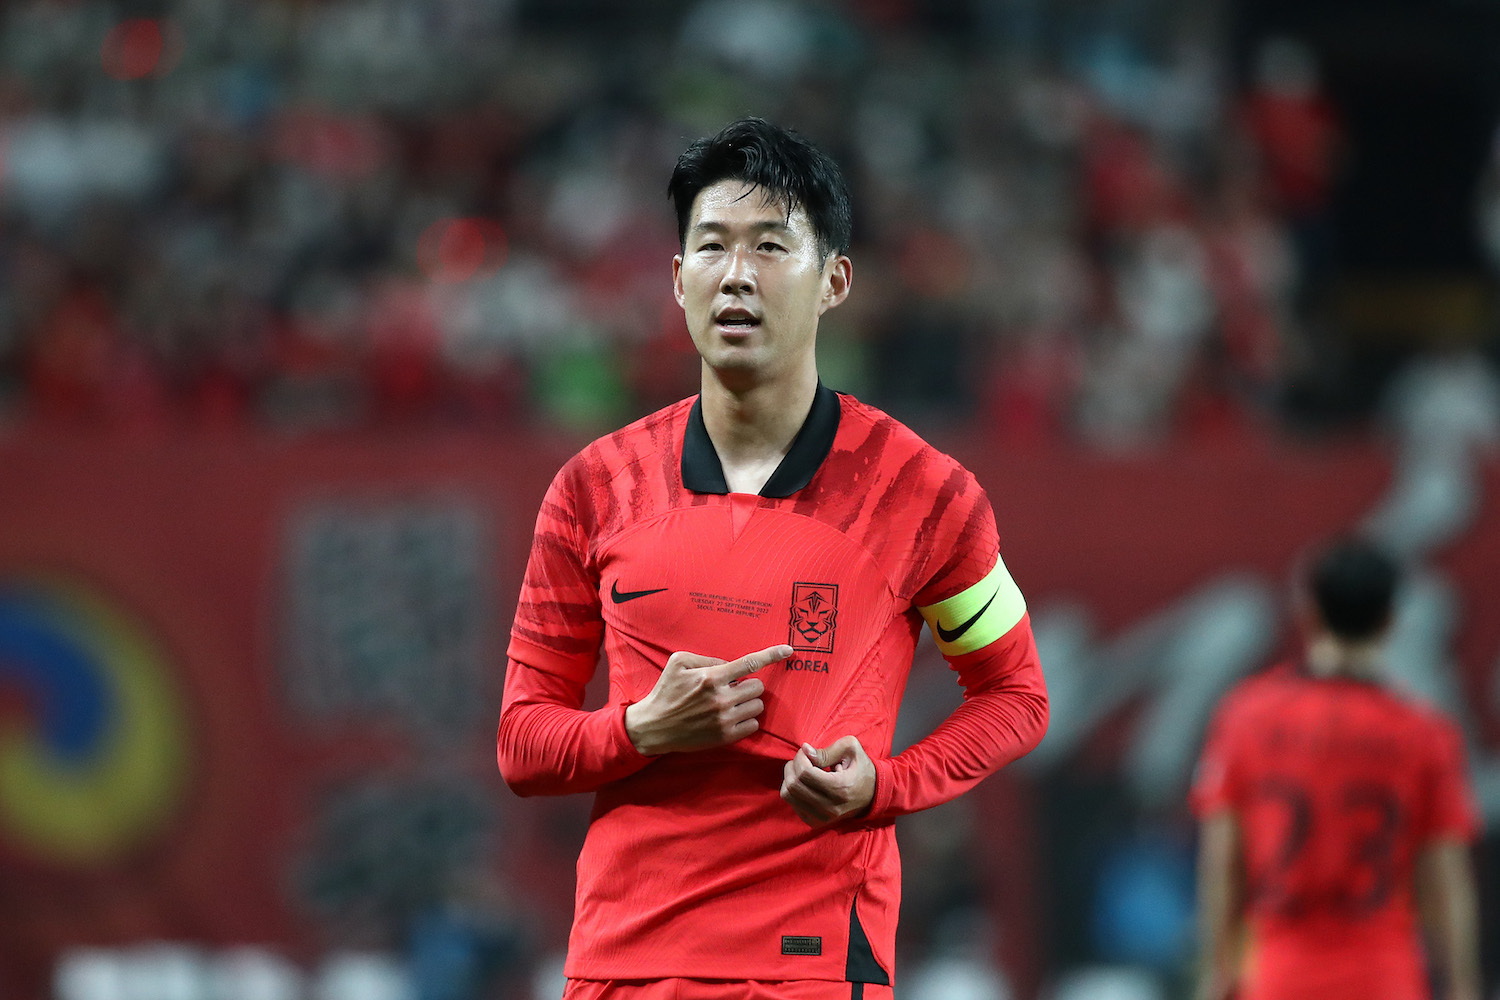 a korean soccer player in a red soccer jersey